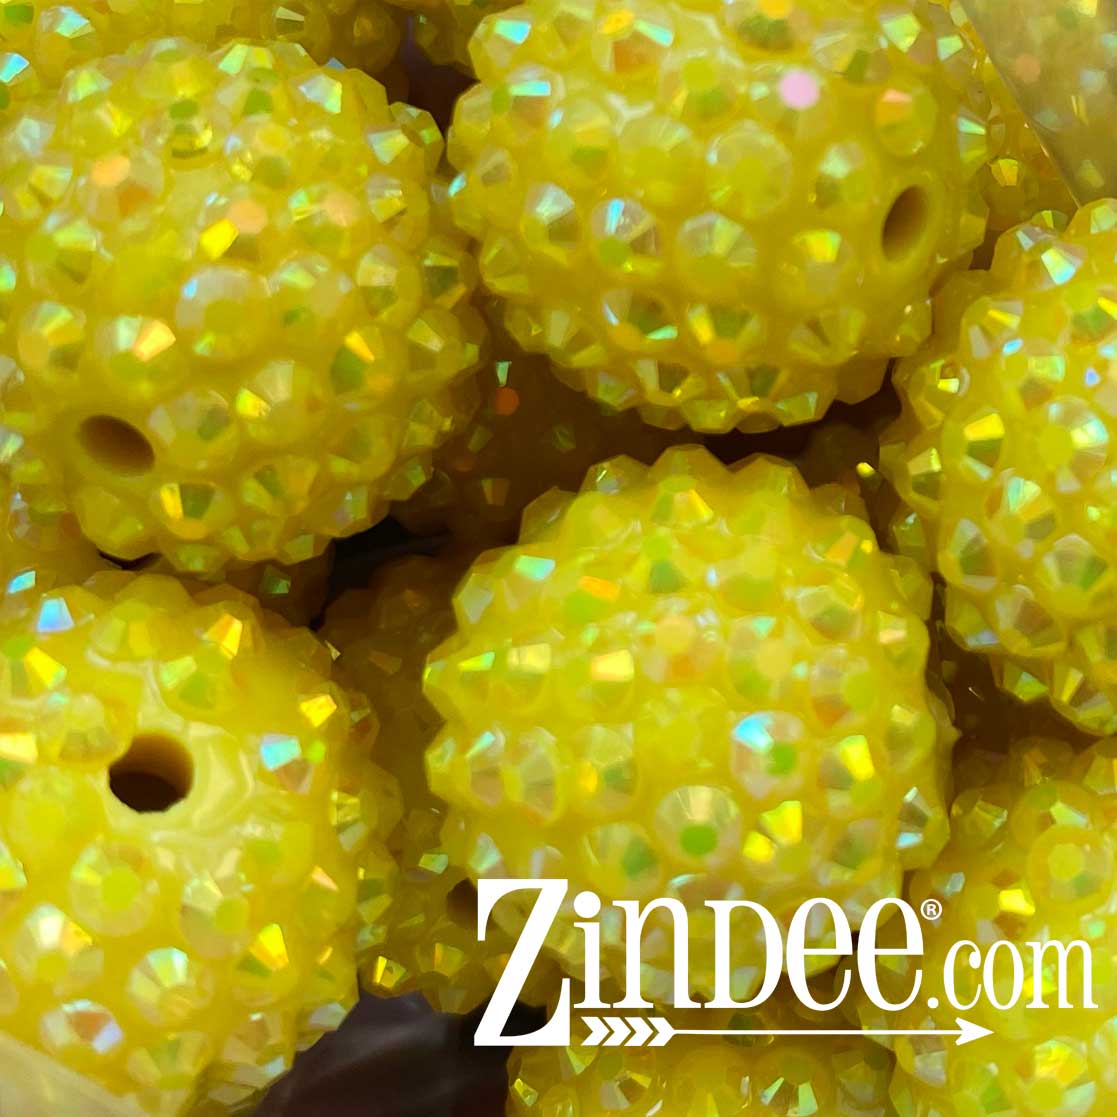 20mm Specialty Beads – Page 6 – Zindee.com